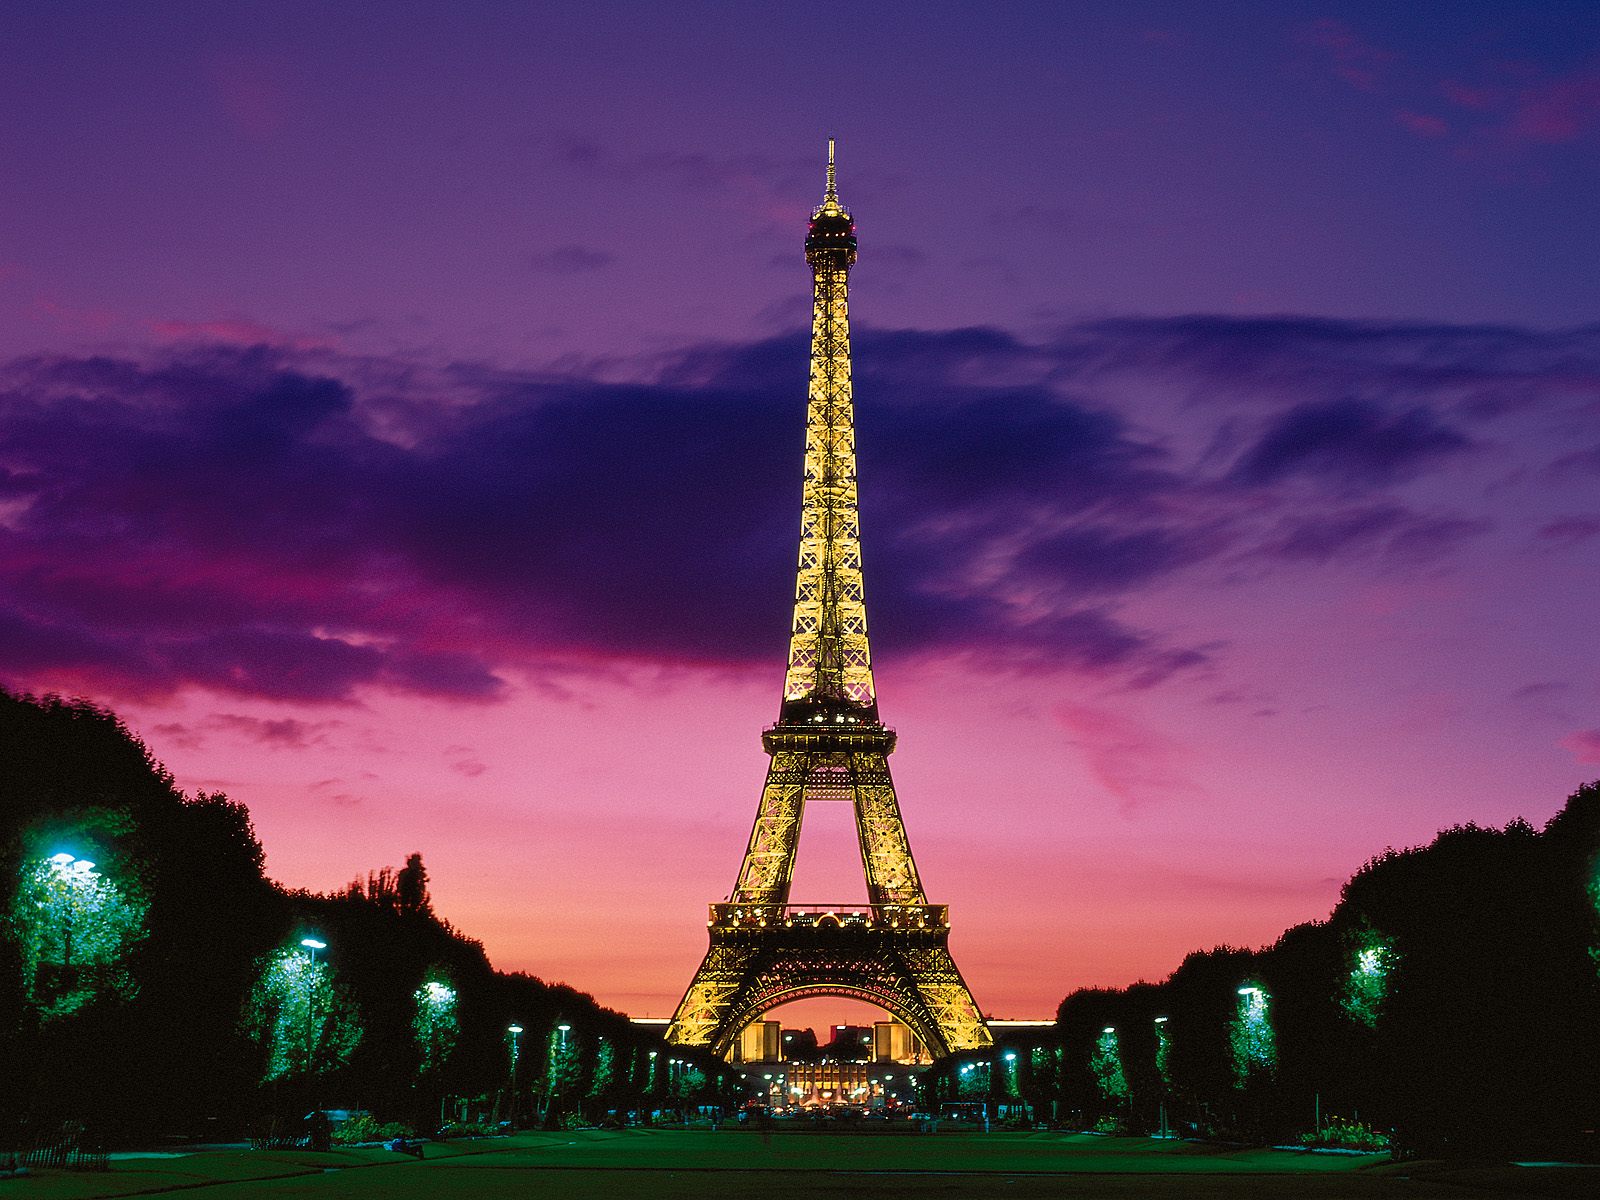 Full front view of Eiffel tower at night